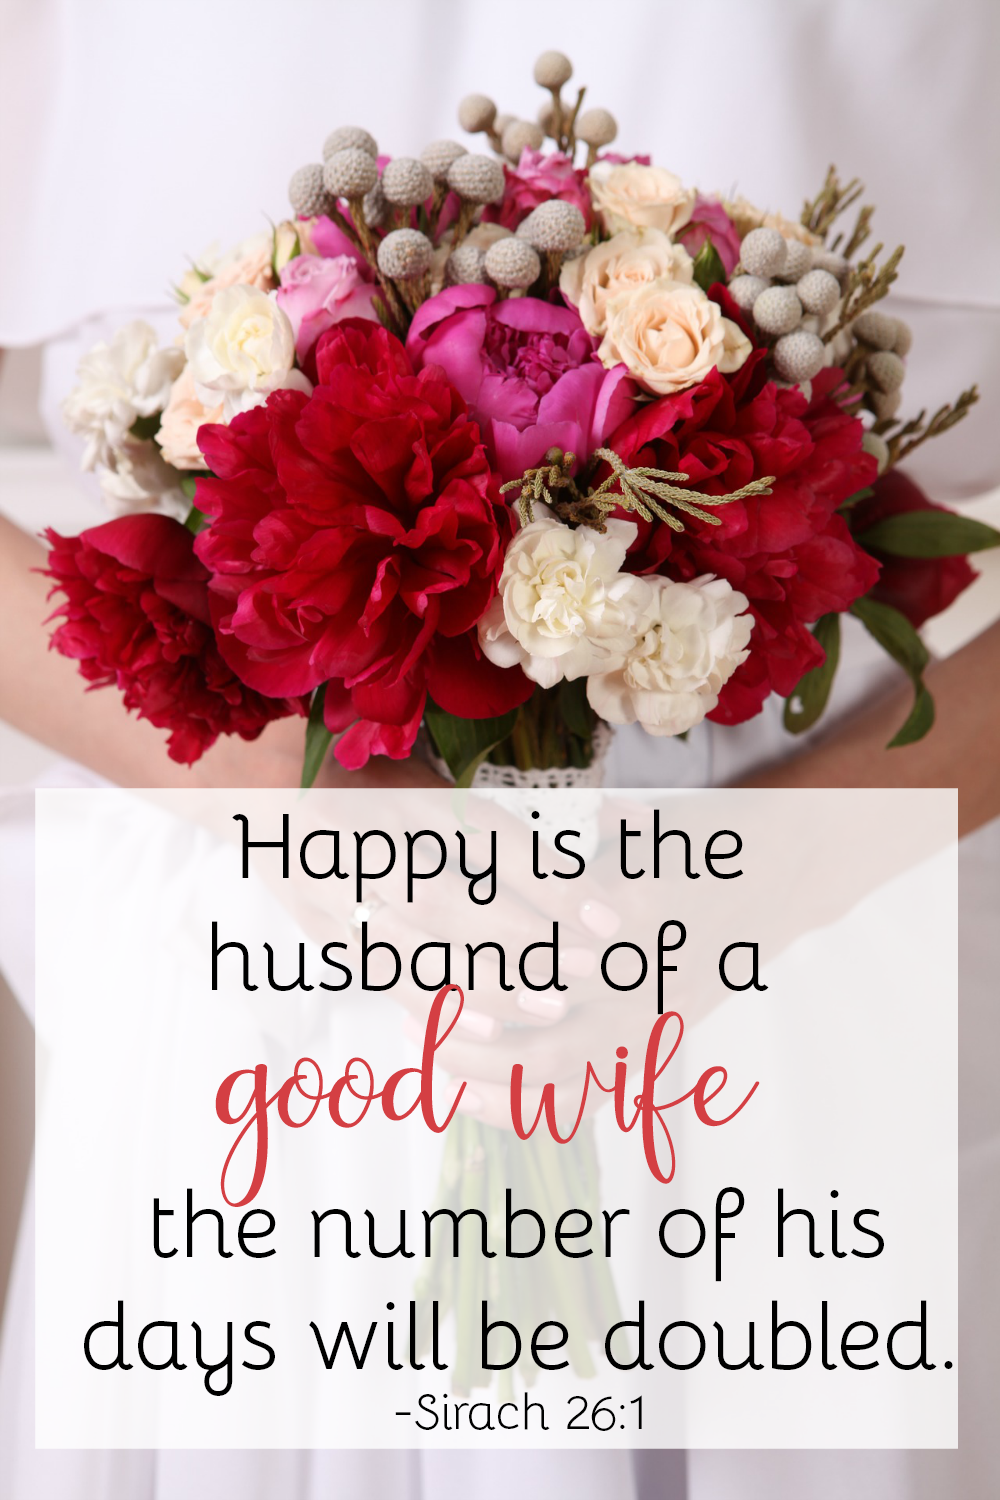 Happy is the husband of a good wife.